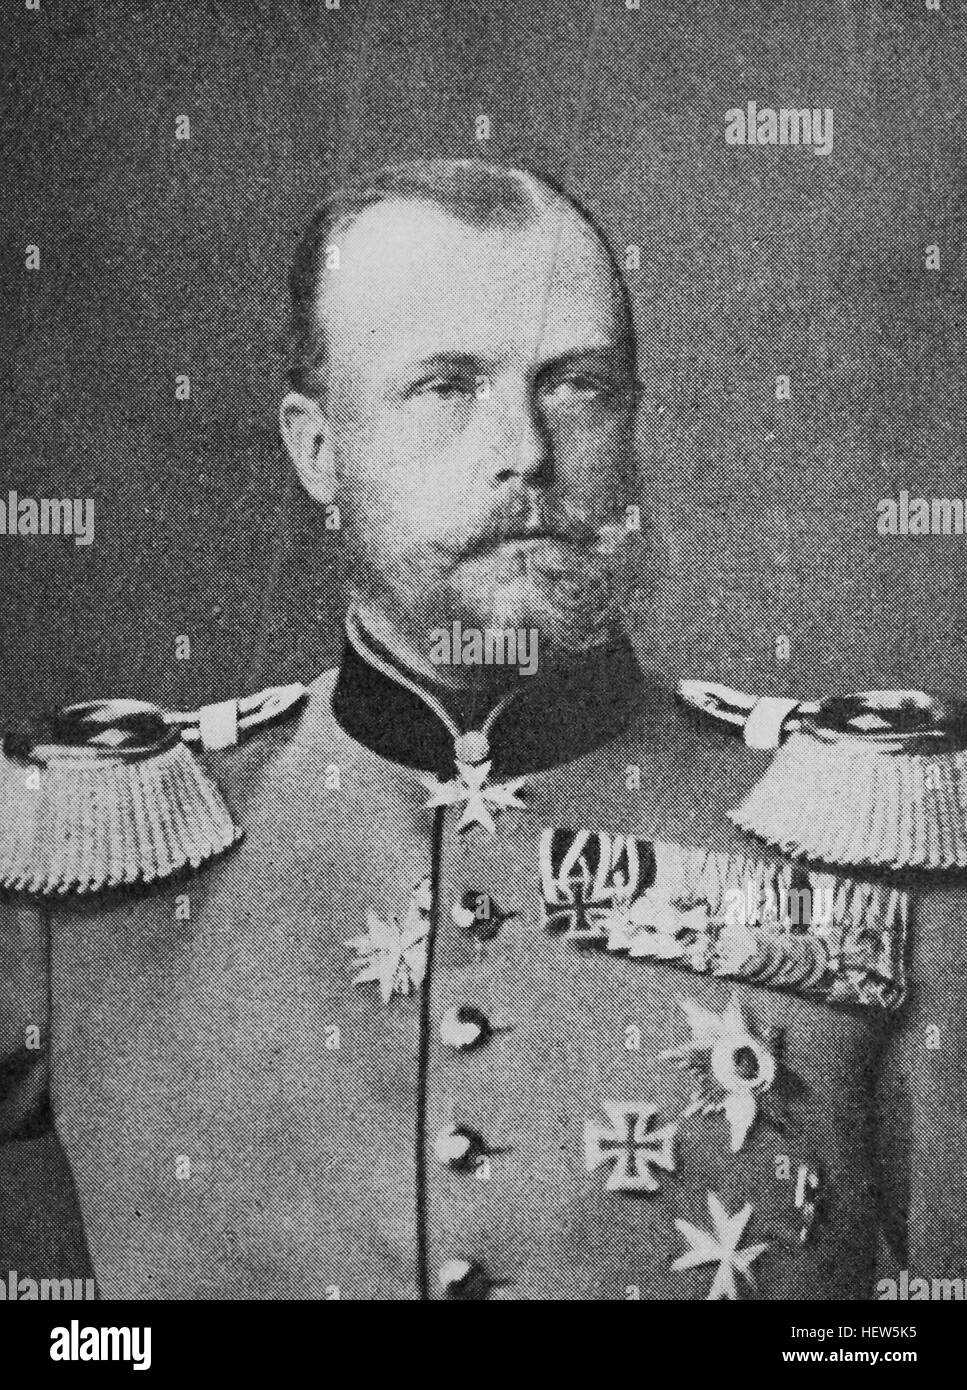 Prince Friedrich Wilhelm Nikolaus Albrecht of Prussia, 8 May 1837 - 13 September 1906, Prussian general field marshal, Herrenmeister, Grand Master, of the Order of Saint John, regent of the Duchy of Brunswick from 1885., picture from 1895, digital improved Stock Photo